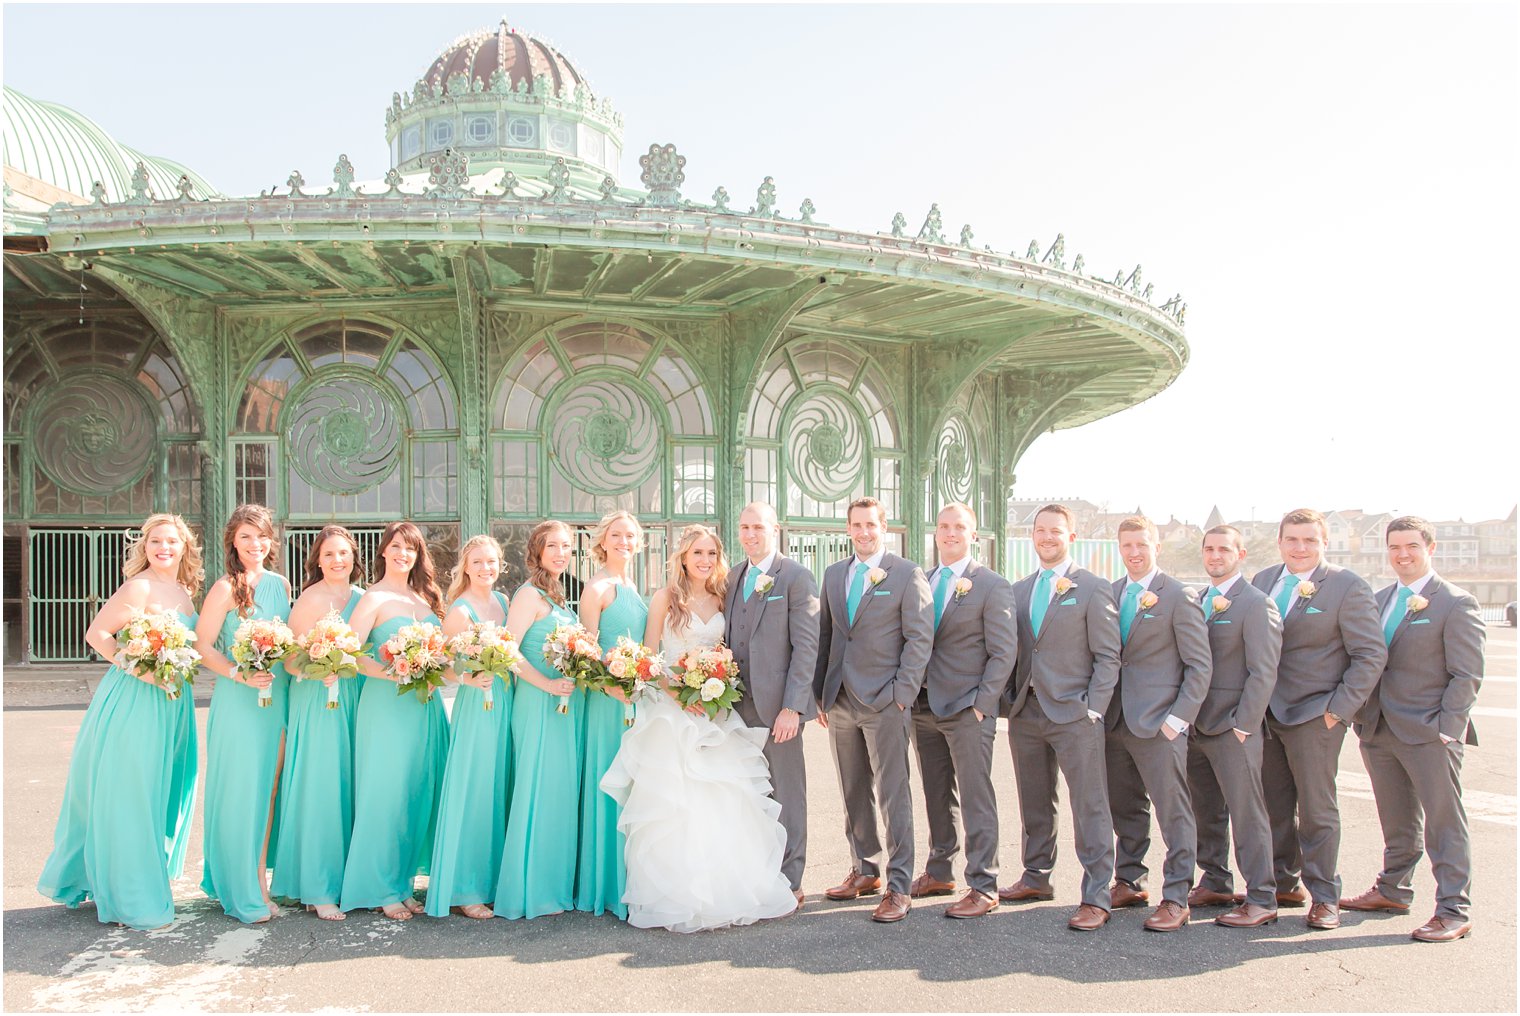 Bridal party photo with turquoise and gray color palette